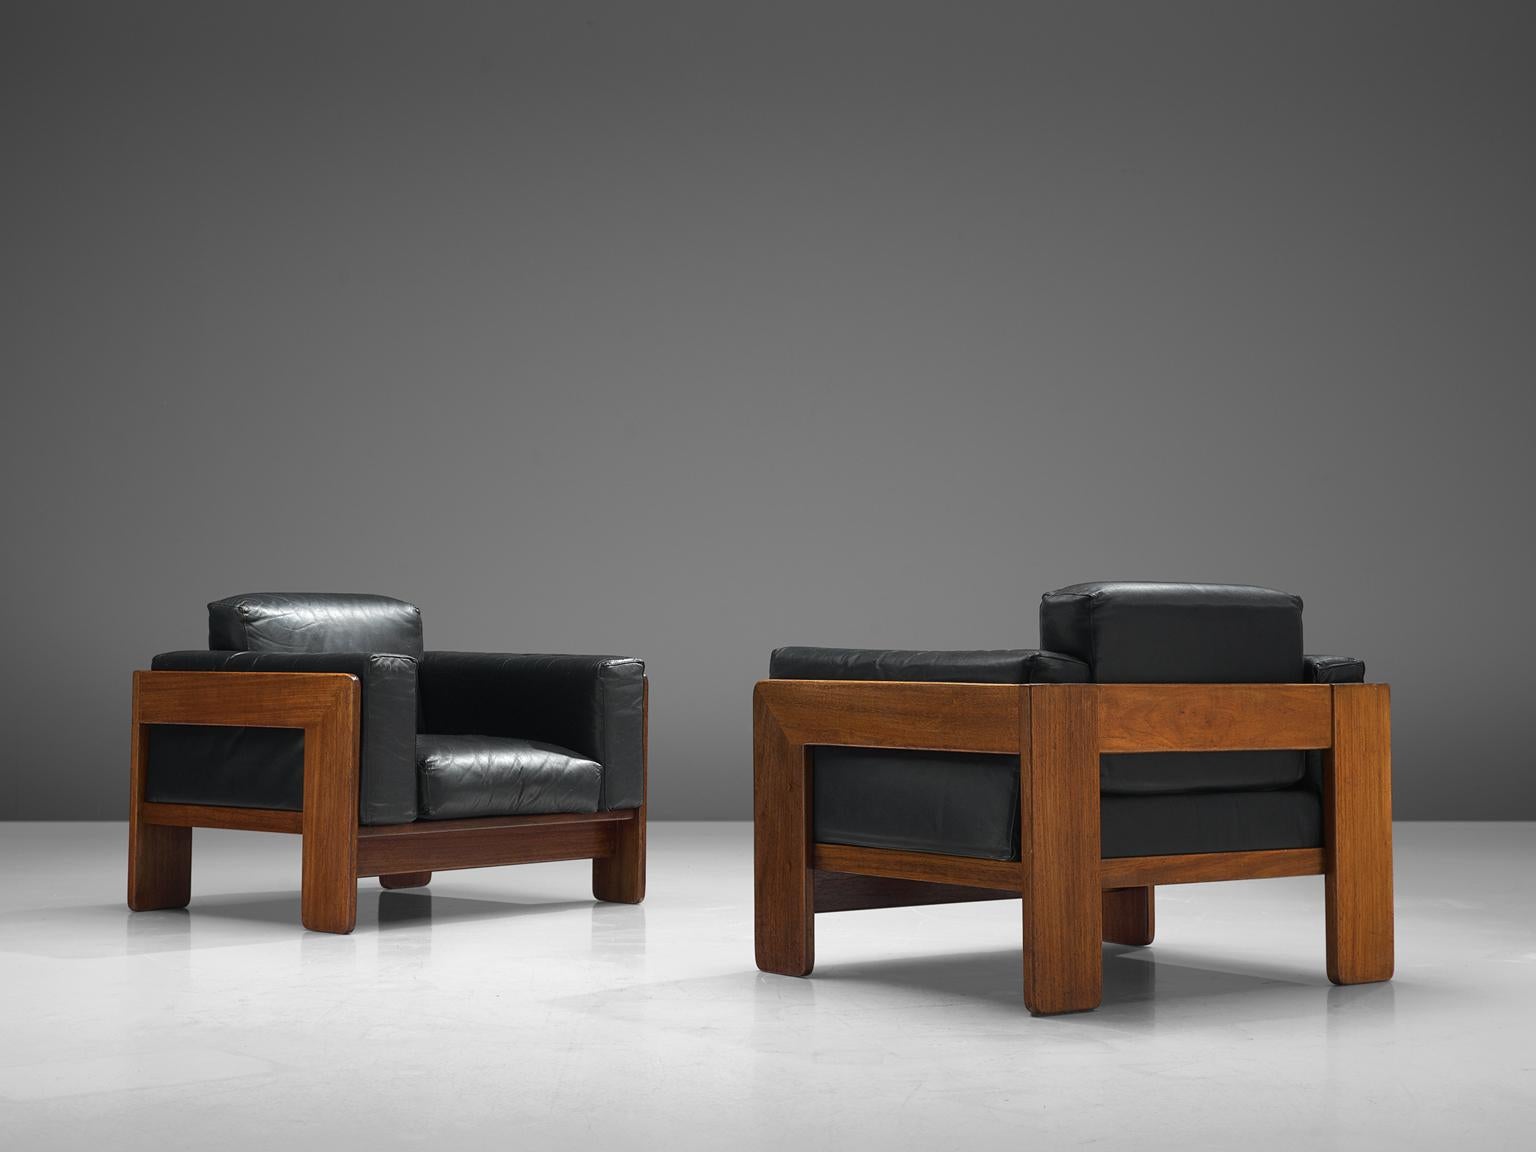 Tobia Scarpa 'Bastiano' Living Room Set in Walnut and Black Leather 3